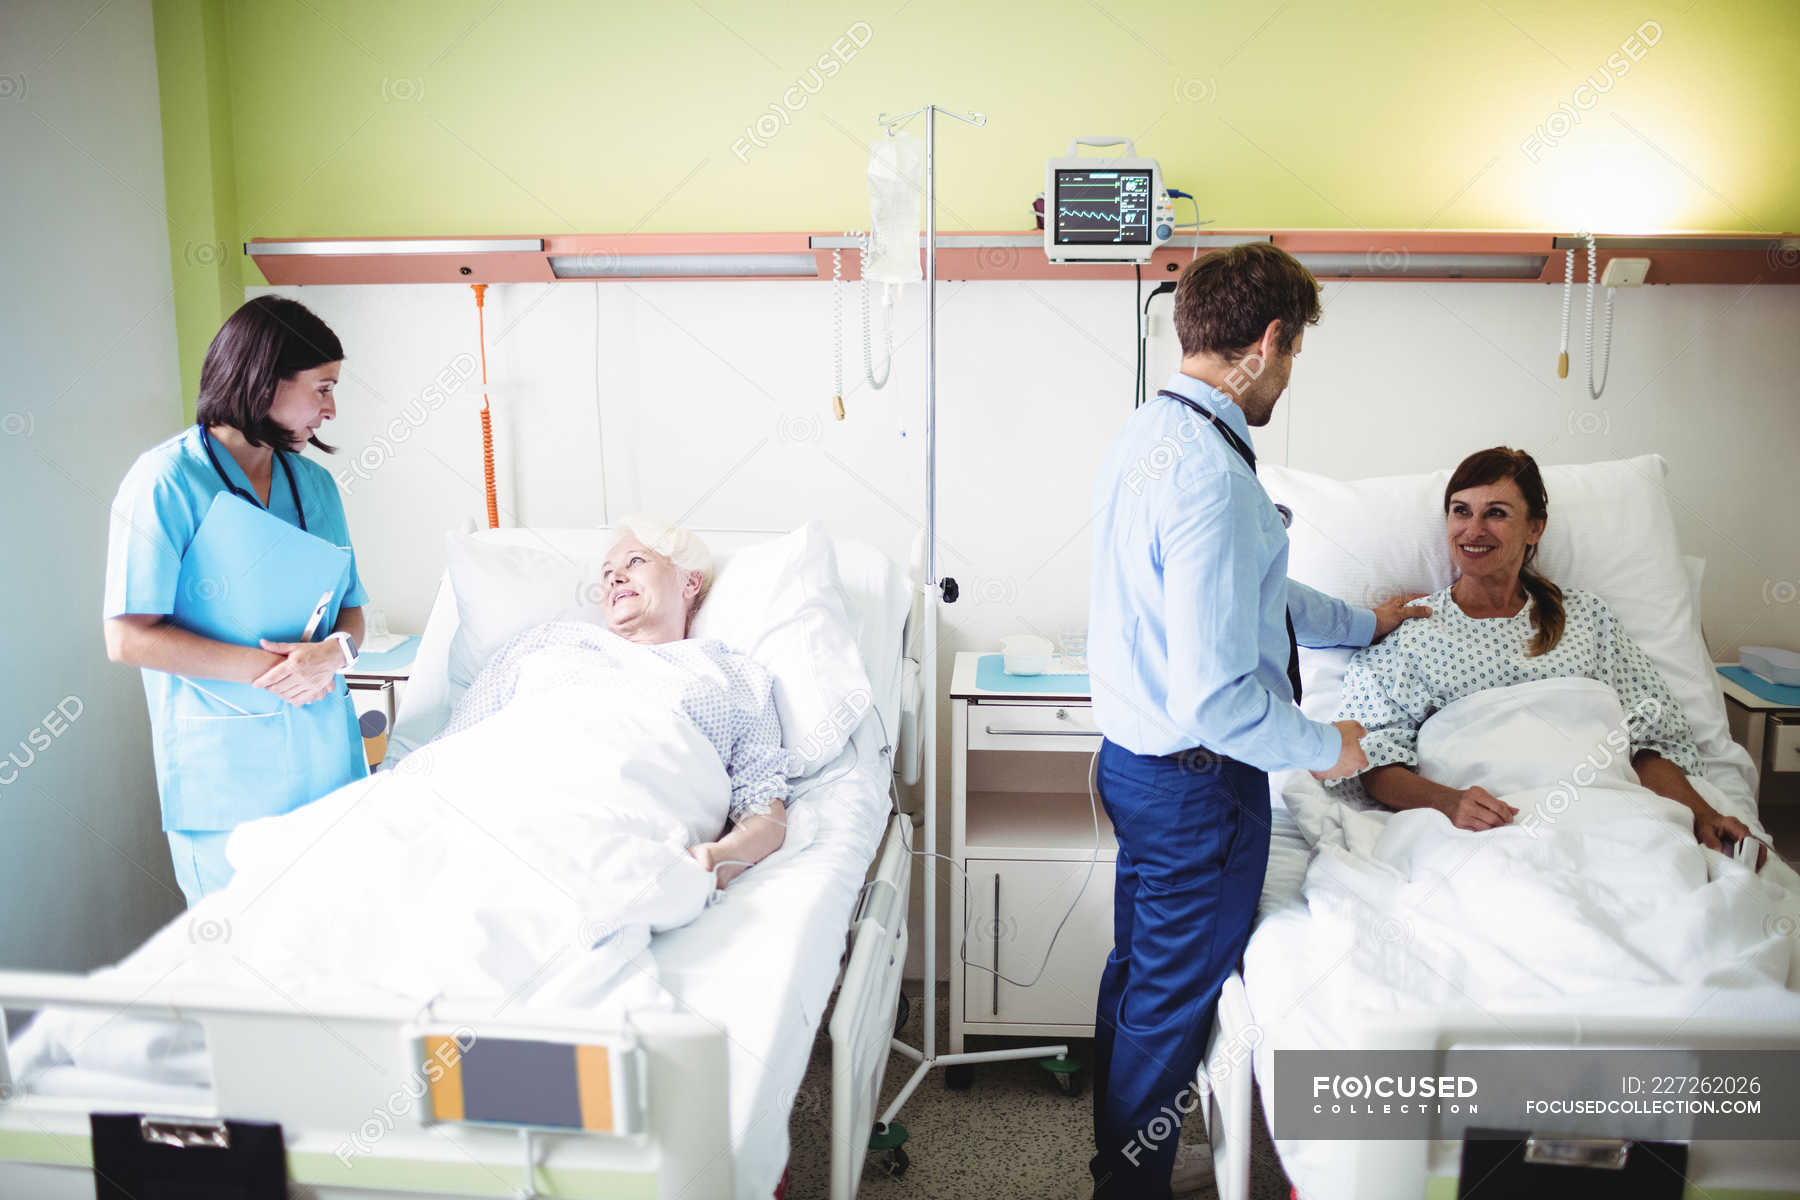 Doctors interacting with patients in hospital ward — professionals, illness - Stock Photo | #227262026